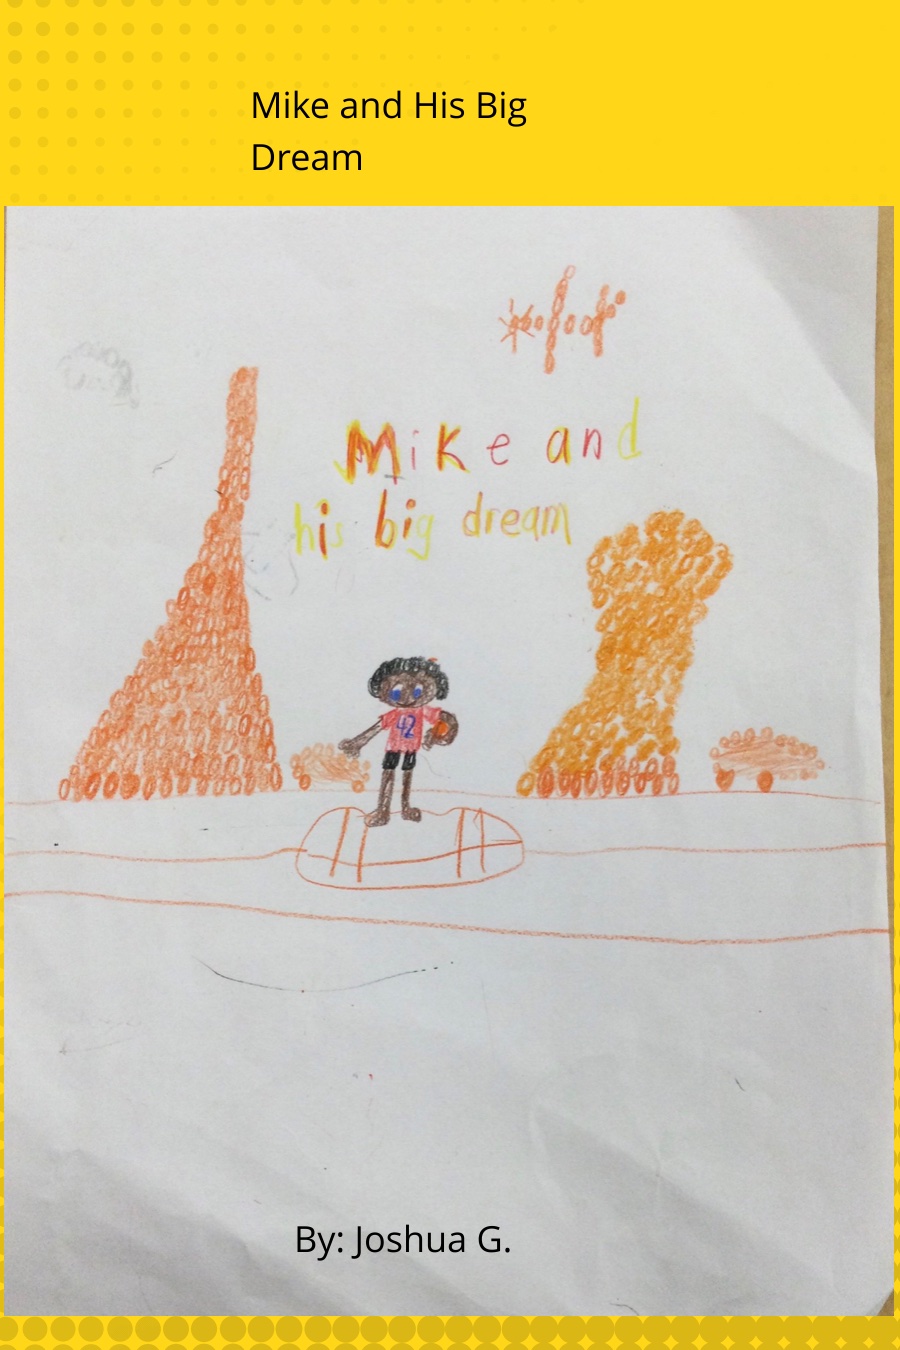 Mike and His Big Dream by Joshua G